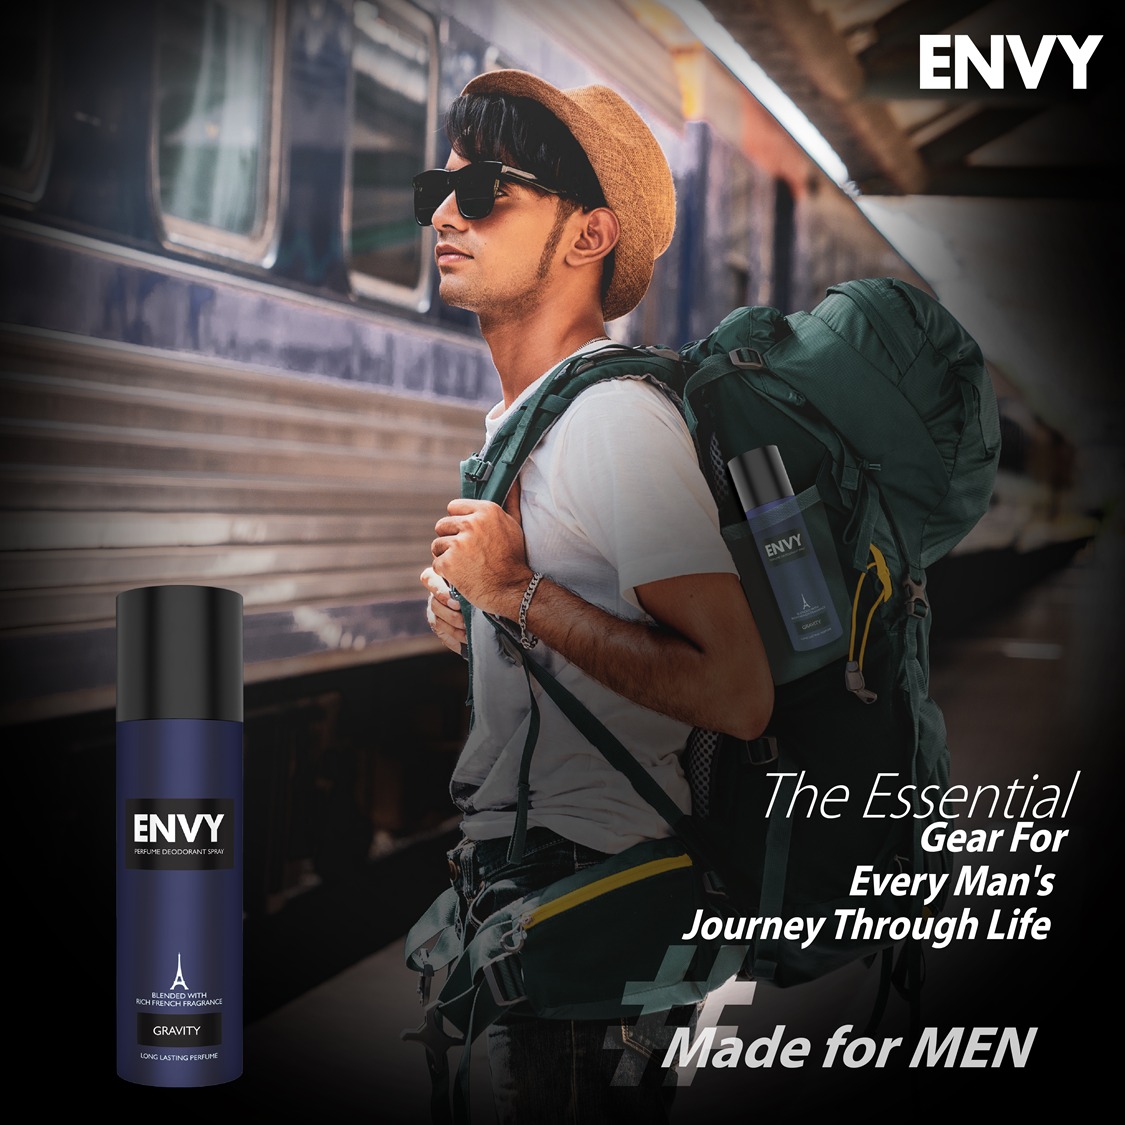 A scent that captures the very essentials of your unique journey, evoking confidence, allure, and the essence of refined masculinity. . . Get Your Envy: envyfragrances.com . . #madeformen #envyfrench #frenchperfume #perfumes #masculinefragrance #menstyling #fashion